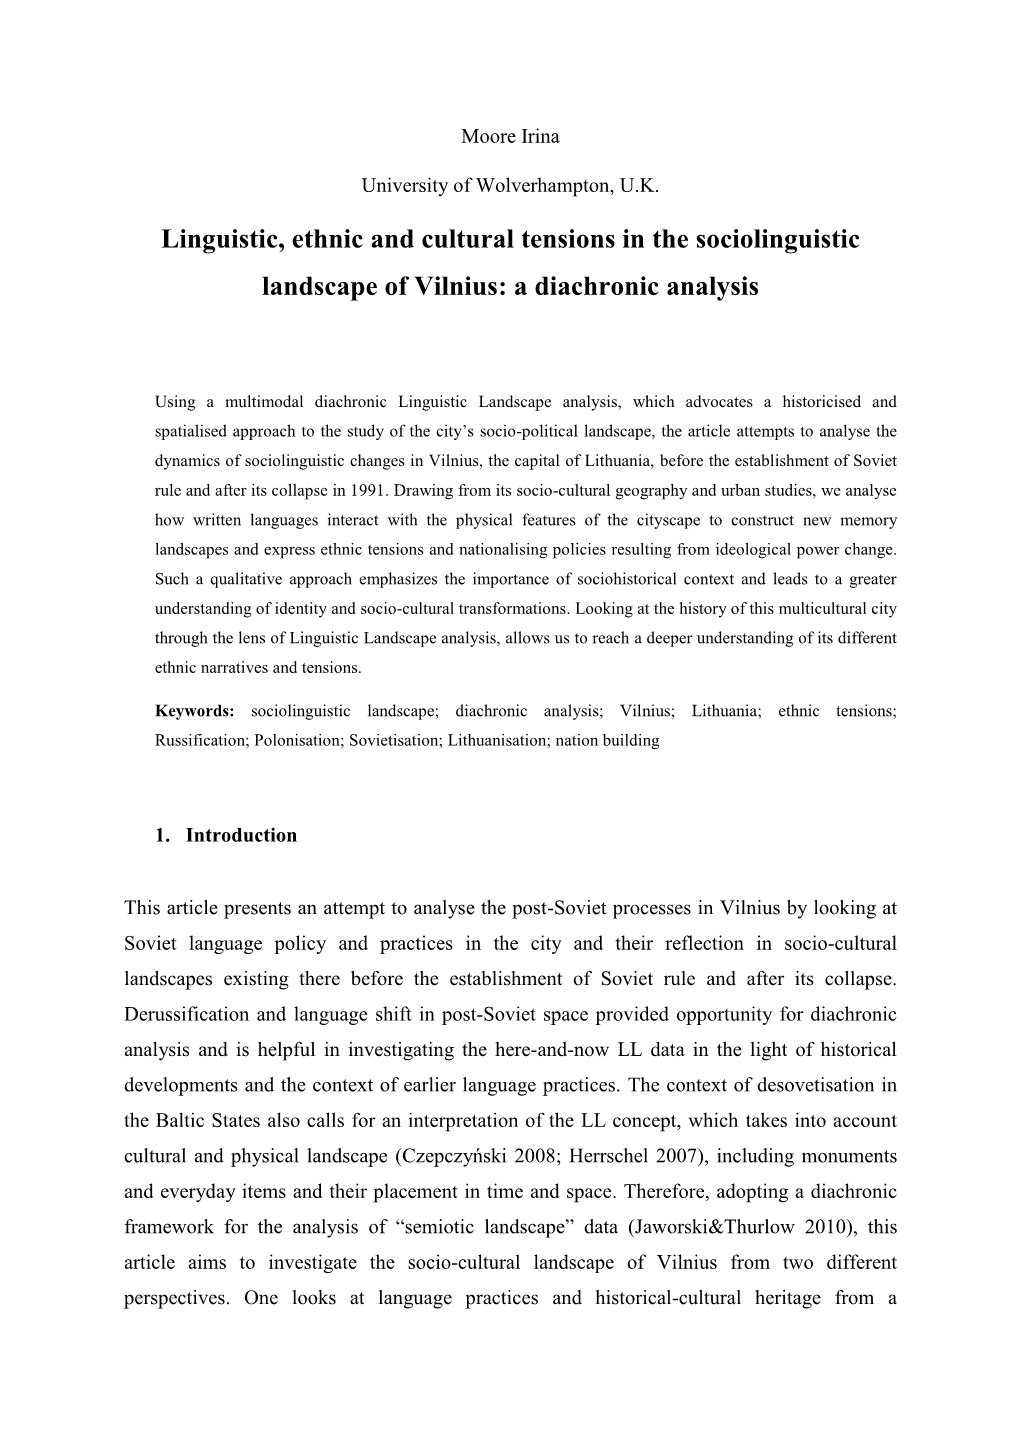 Linguistic, Ethnic and Cultural Tensions in the Sociolinguistic Landscape of Vilnius: a Diachronic Analysis